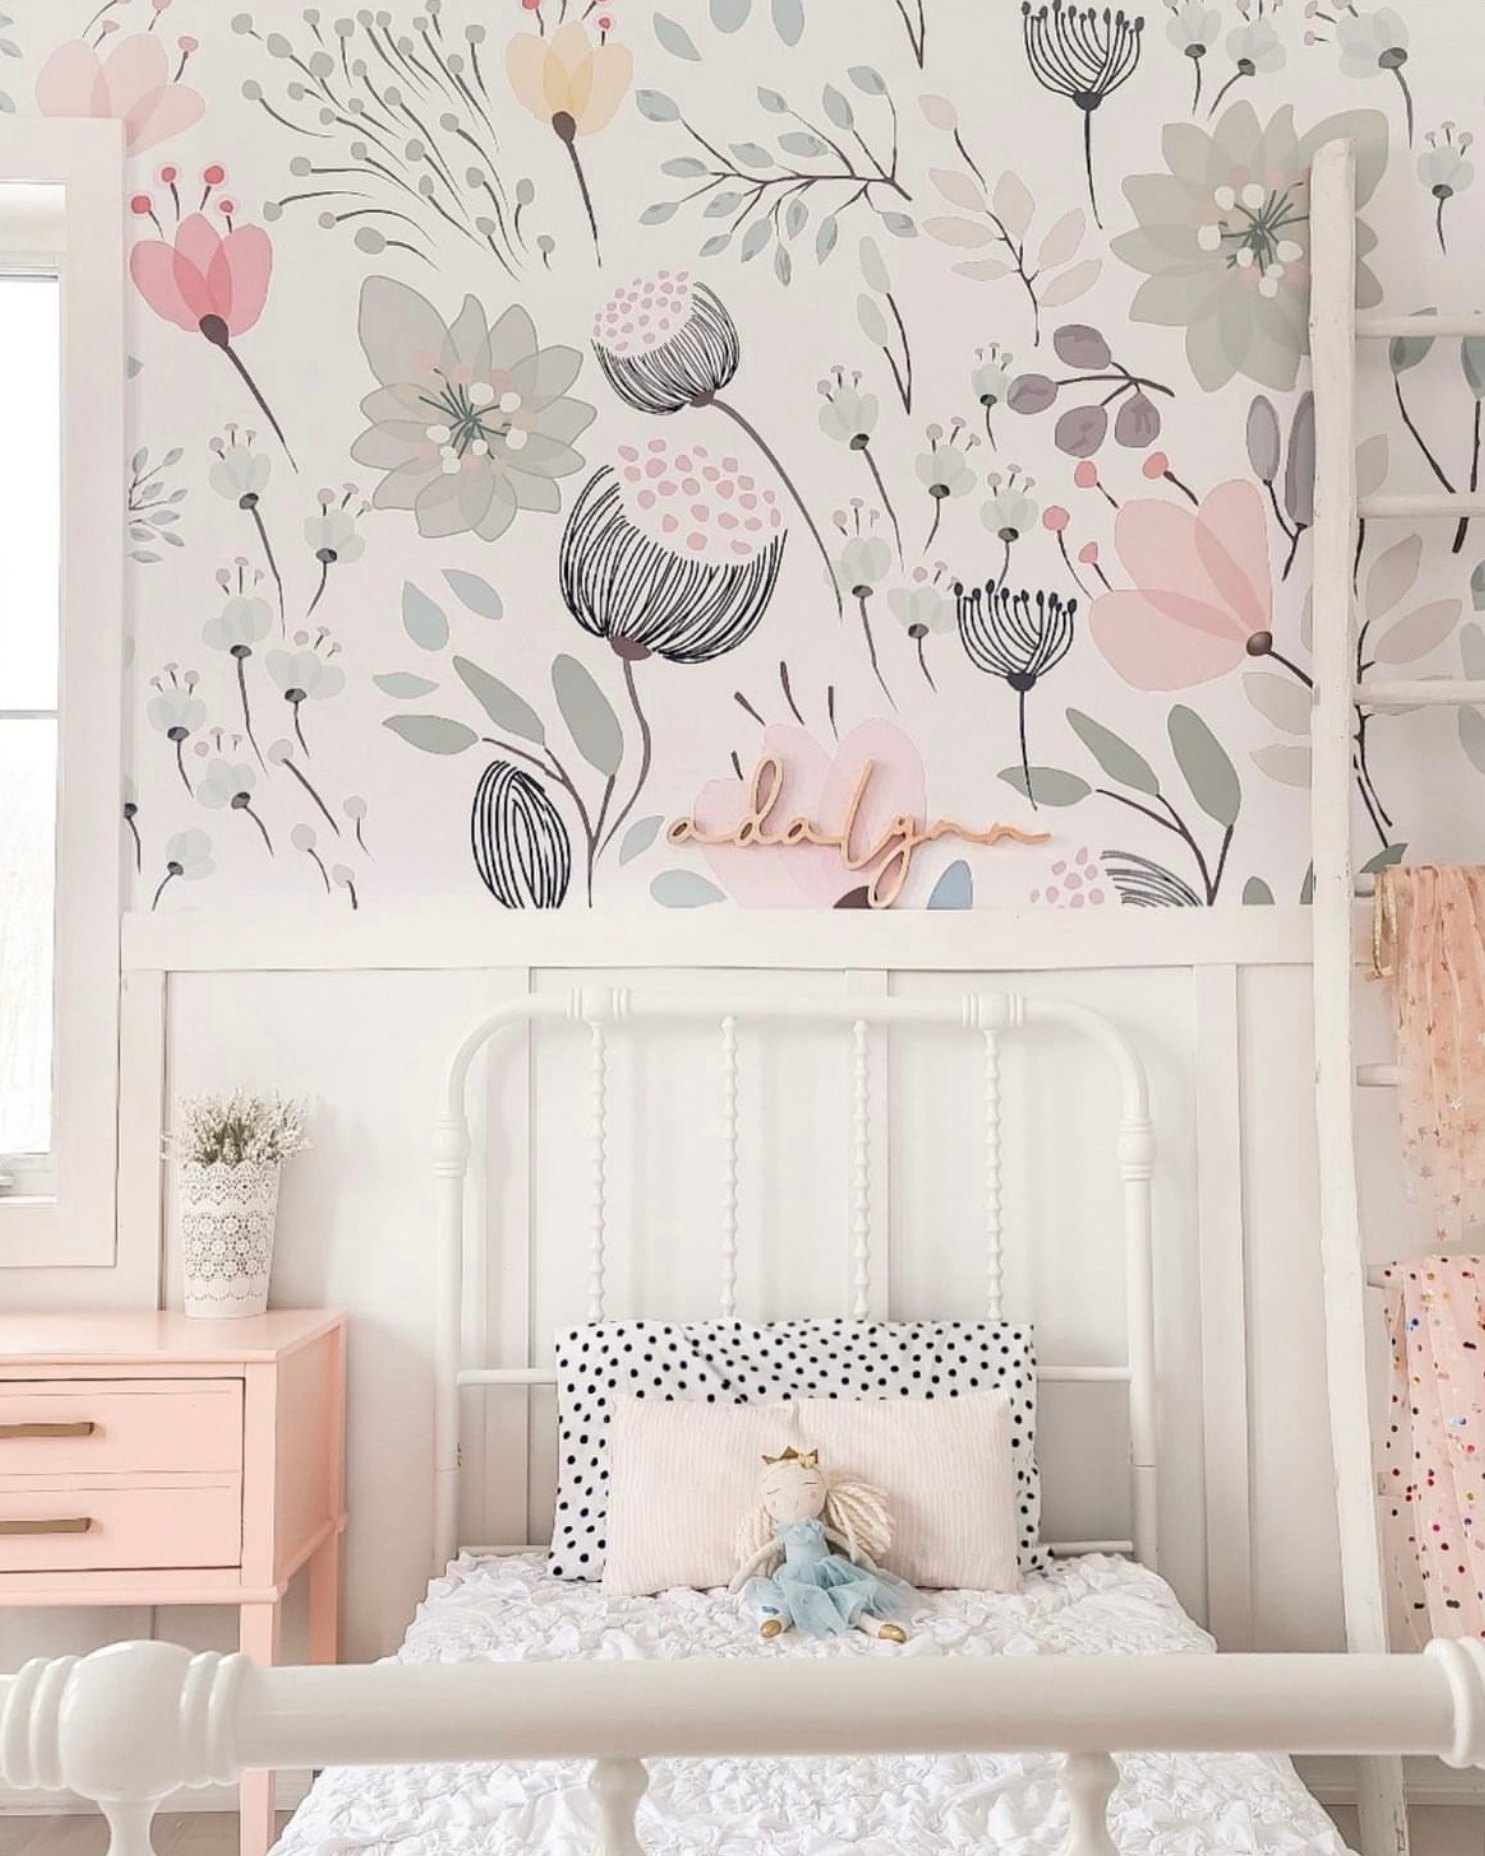 A cozy corner of a child's bedroom with the pastel floral wallpaper providing a delicate backdrop to a white metal bed adorned with a pink bedspread, a white and polka dot pillow, and soft toys, creating a dreamy and comforting atmosphere